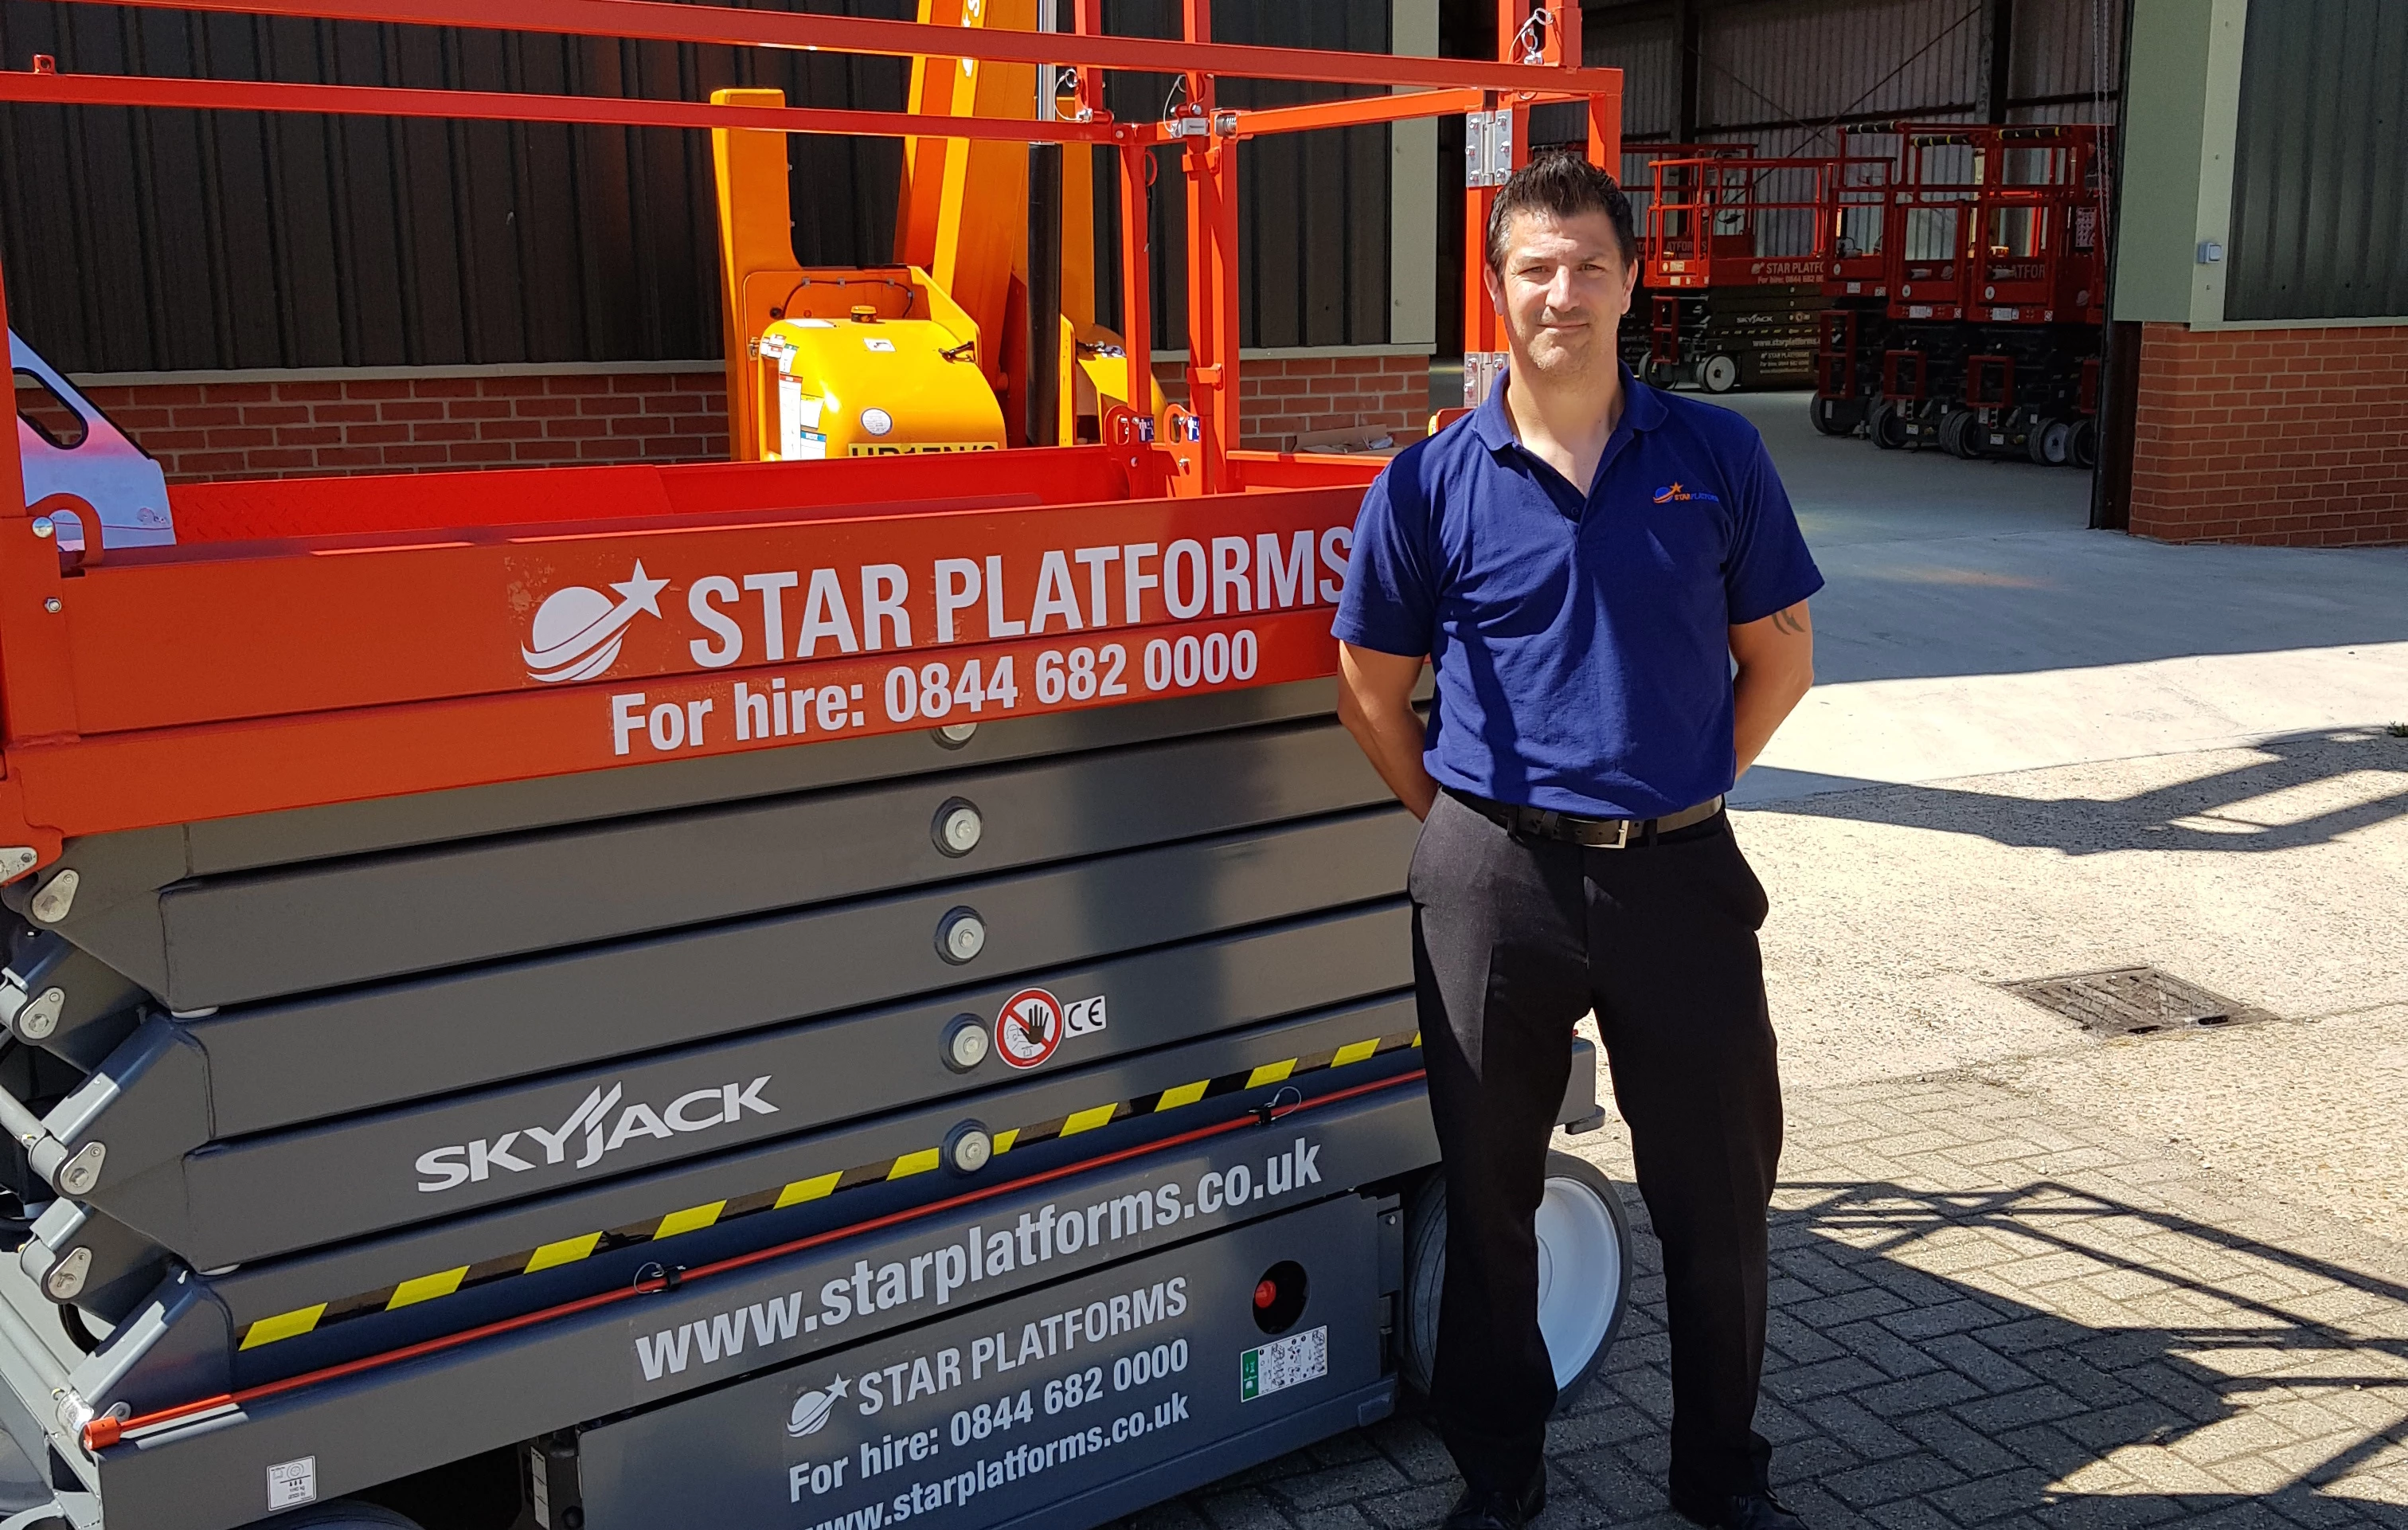 The investment will support the launch of Star Platforms' new Thetford depot